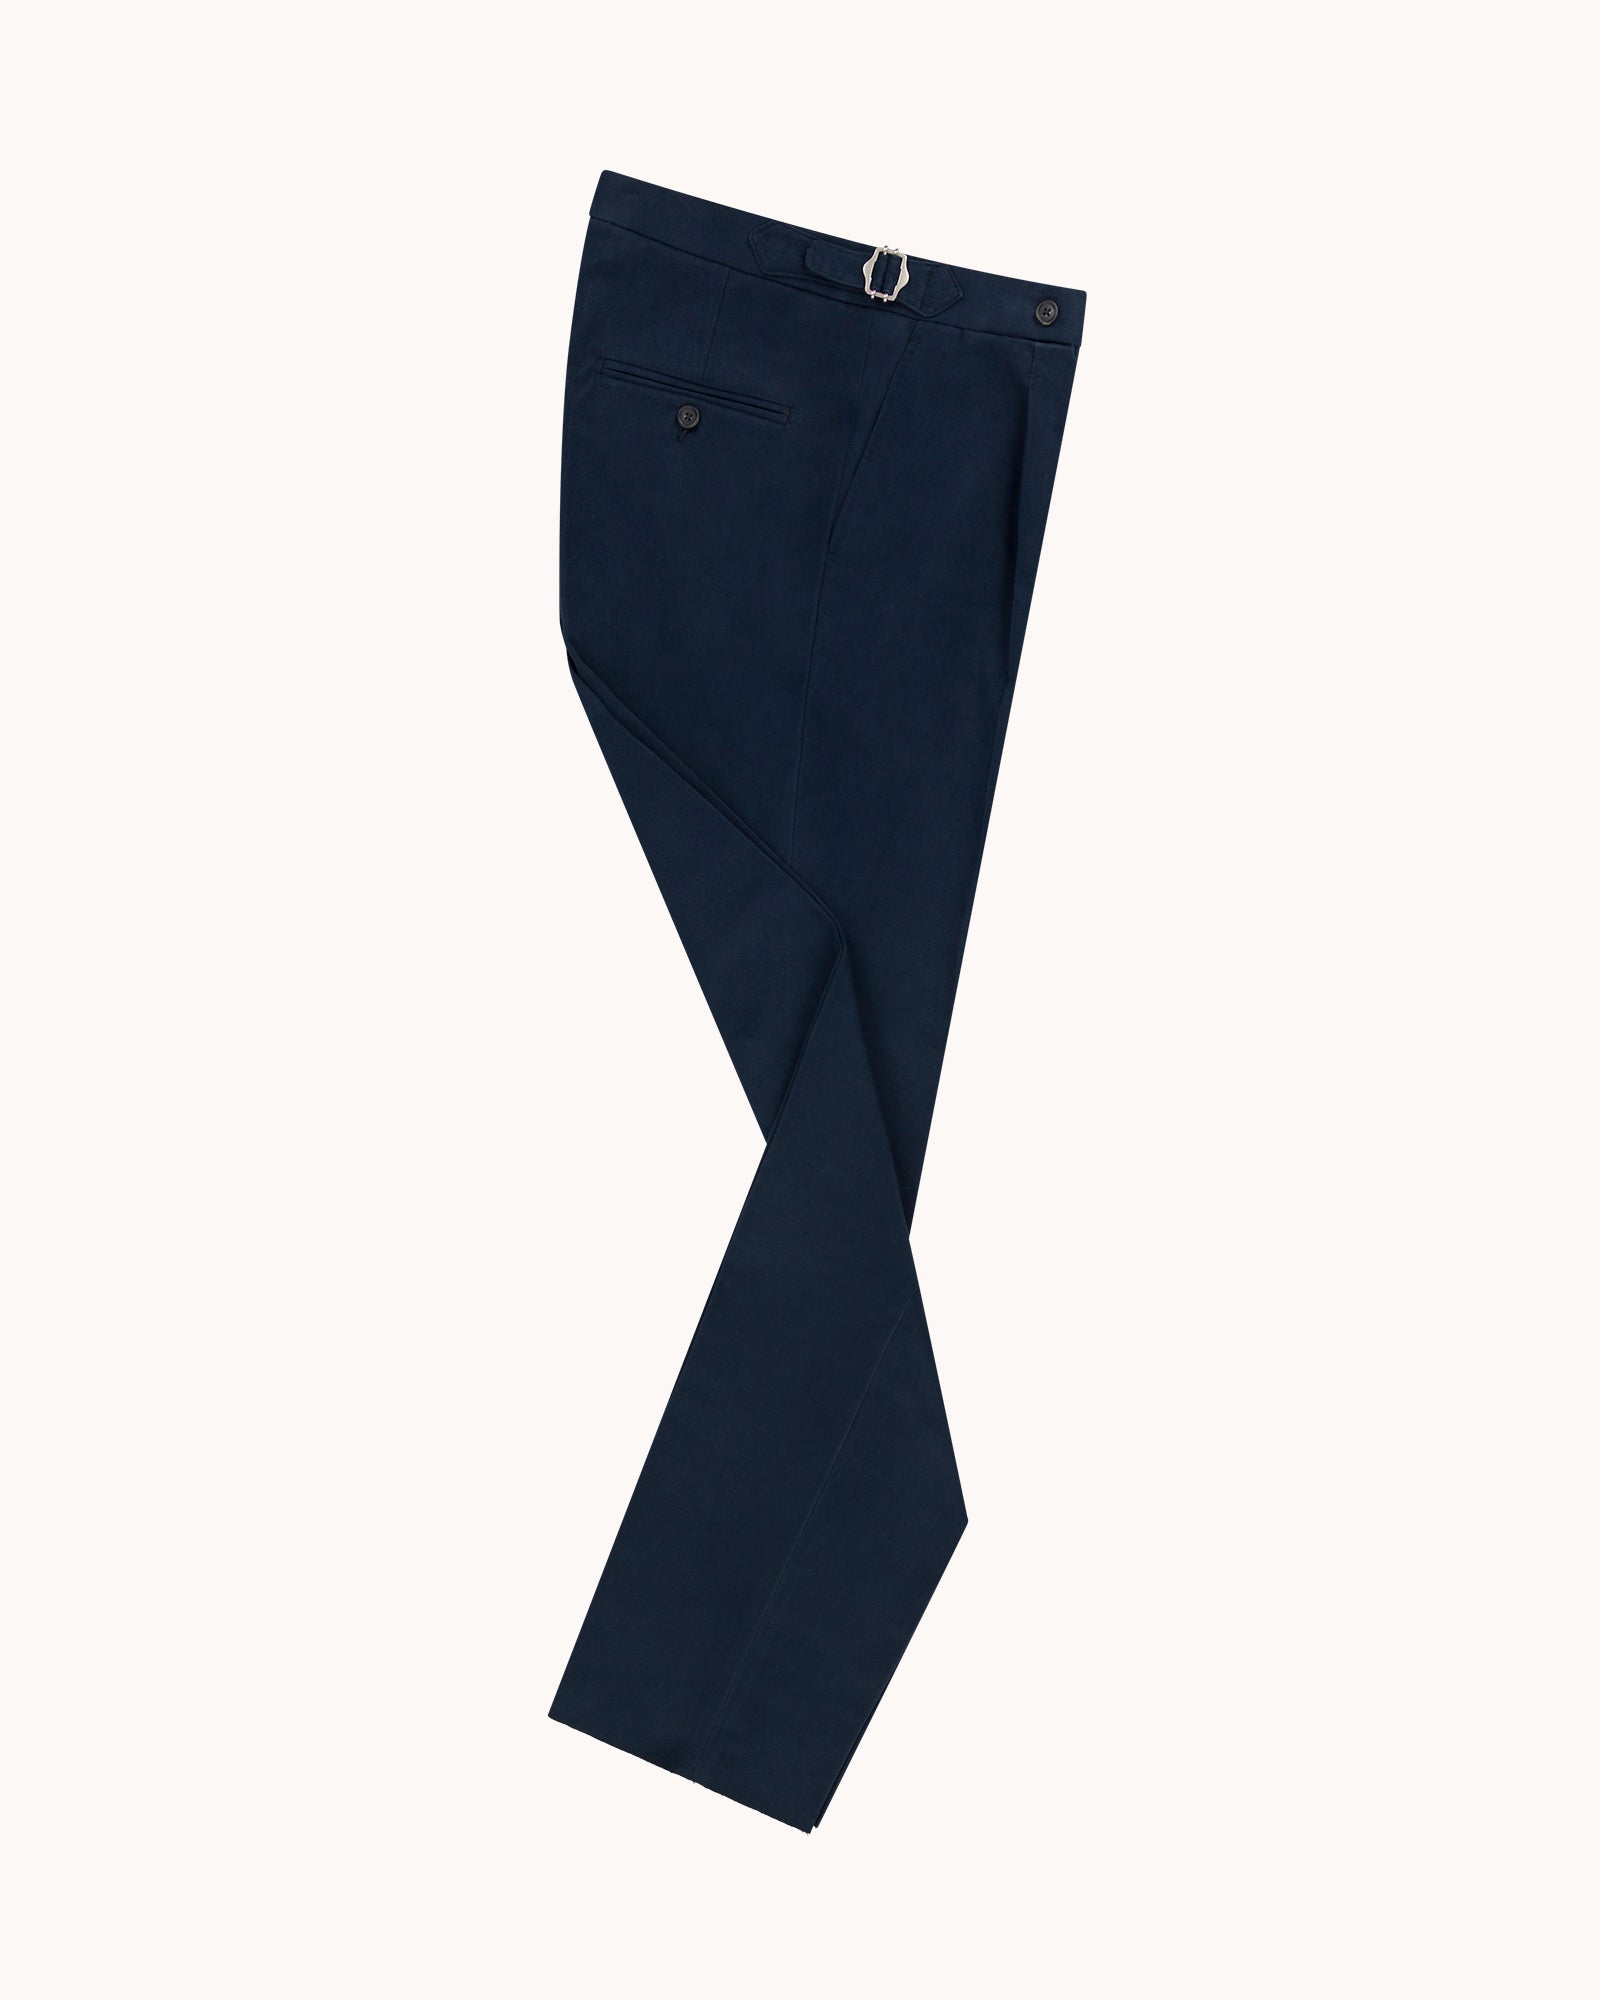 Single Pleat Trouser - Navy Brushed Cotton